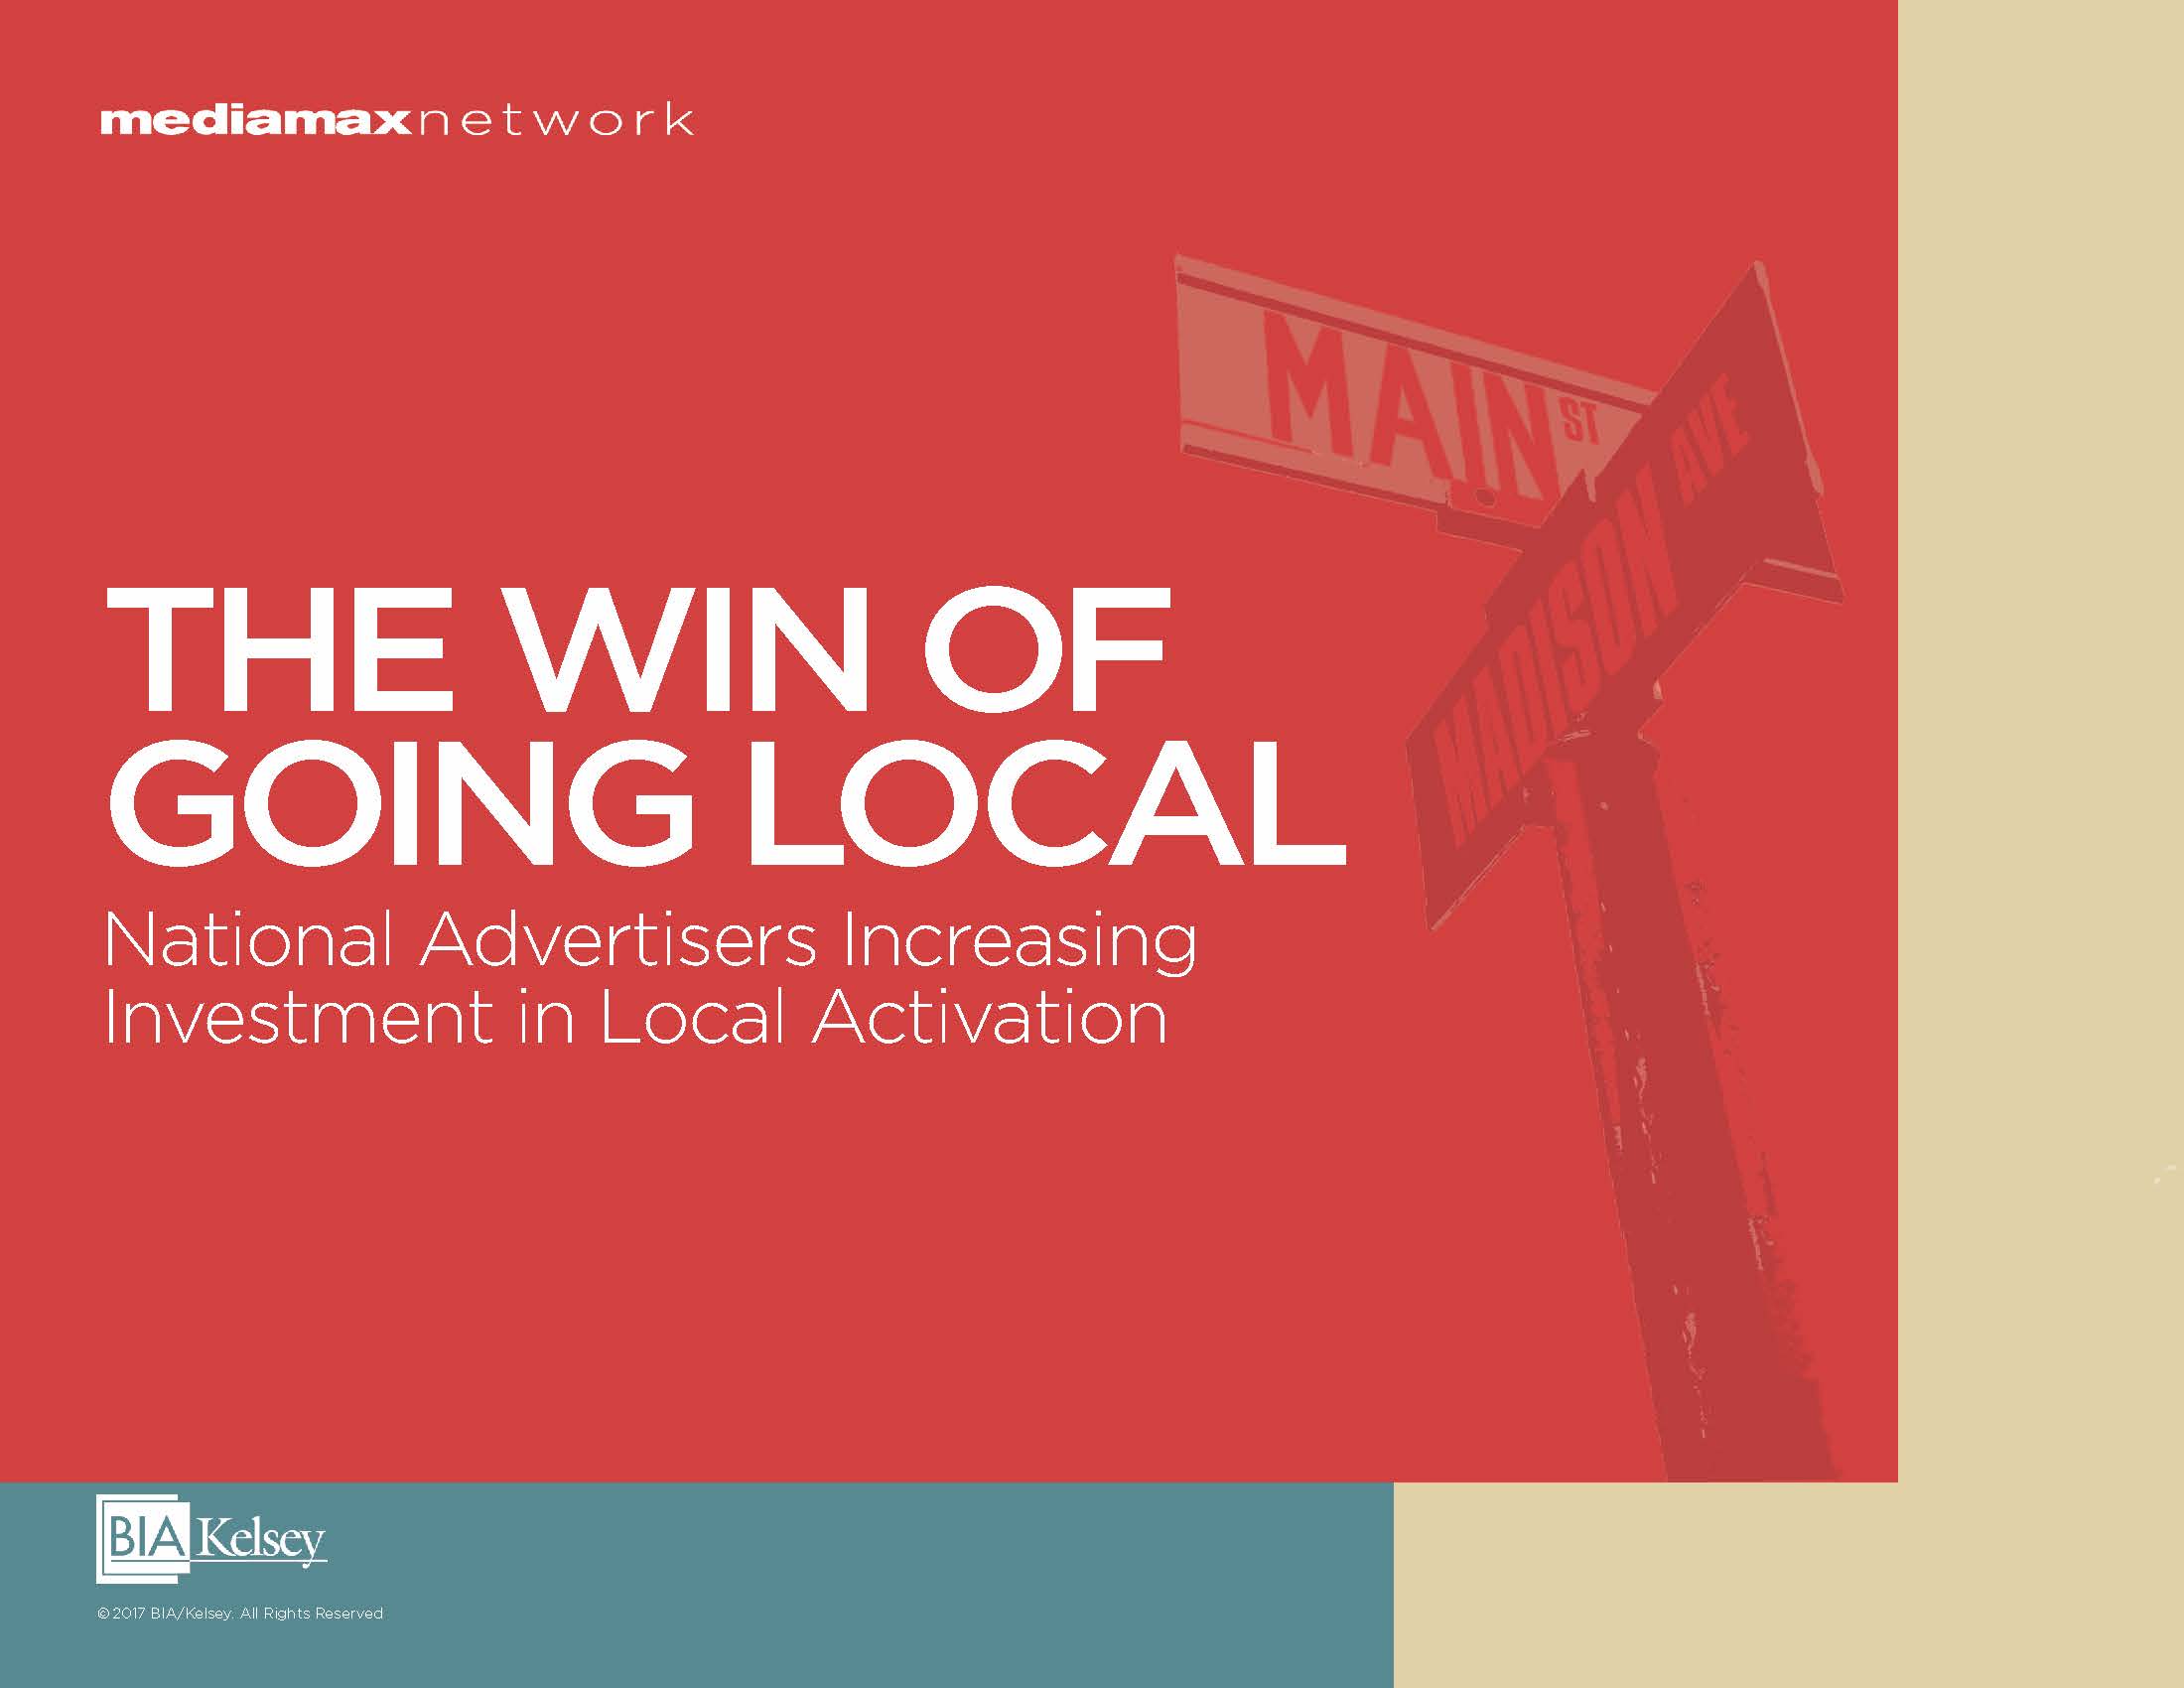 Localized Media Campaigns Can Help National Brands Drive Higher Growth